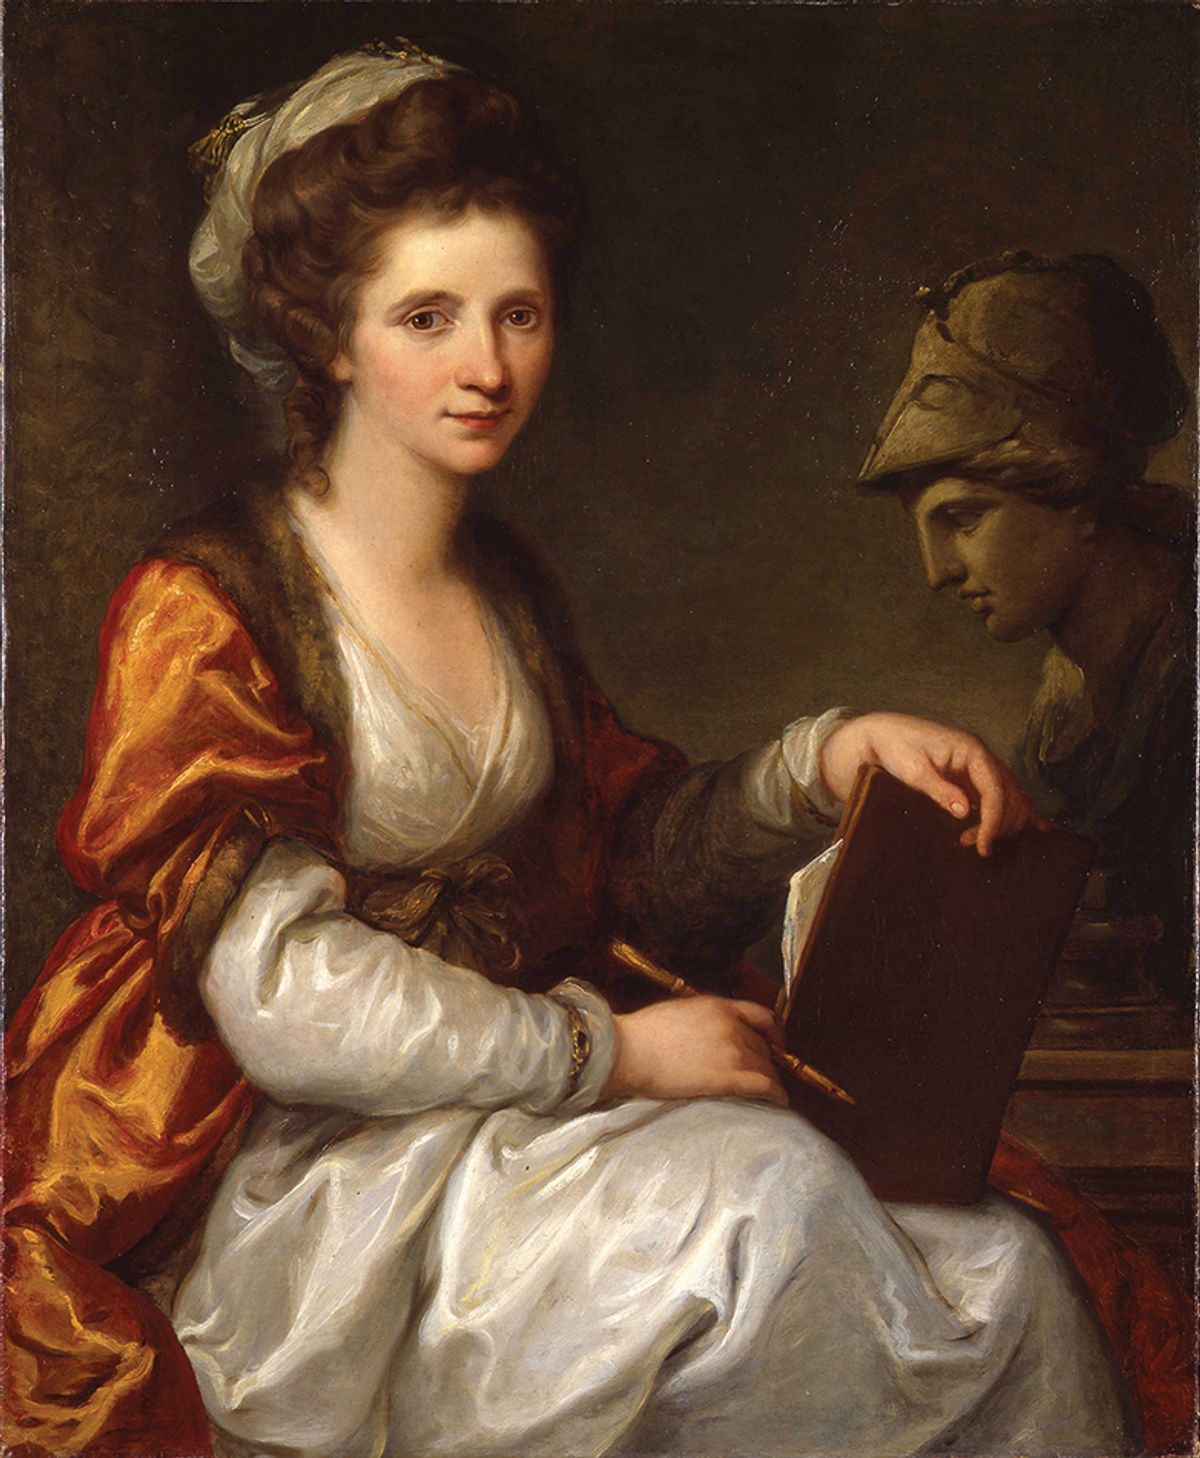 Angelica Kauffman’s Self-portrait with Bust of Minerva (around 1780), one of several self-portraits she painted Gottfried Keller Foundation, Federal Office of Culture, Bern